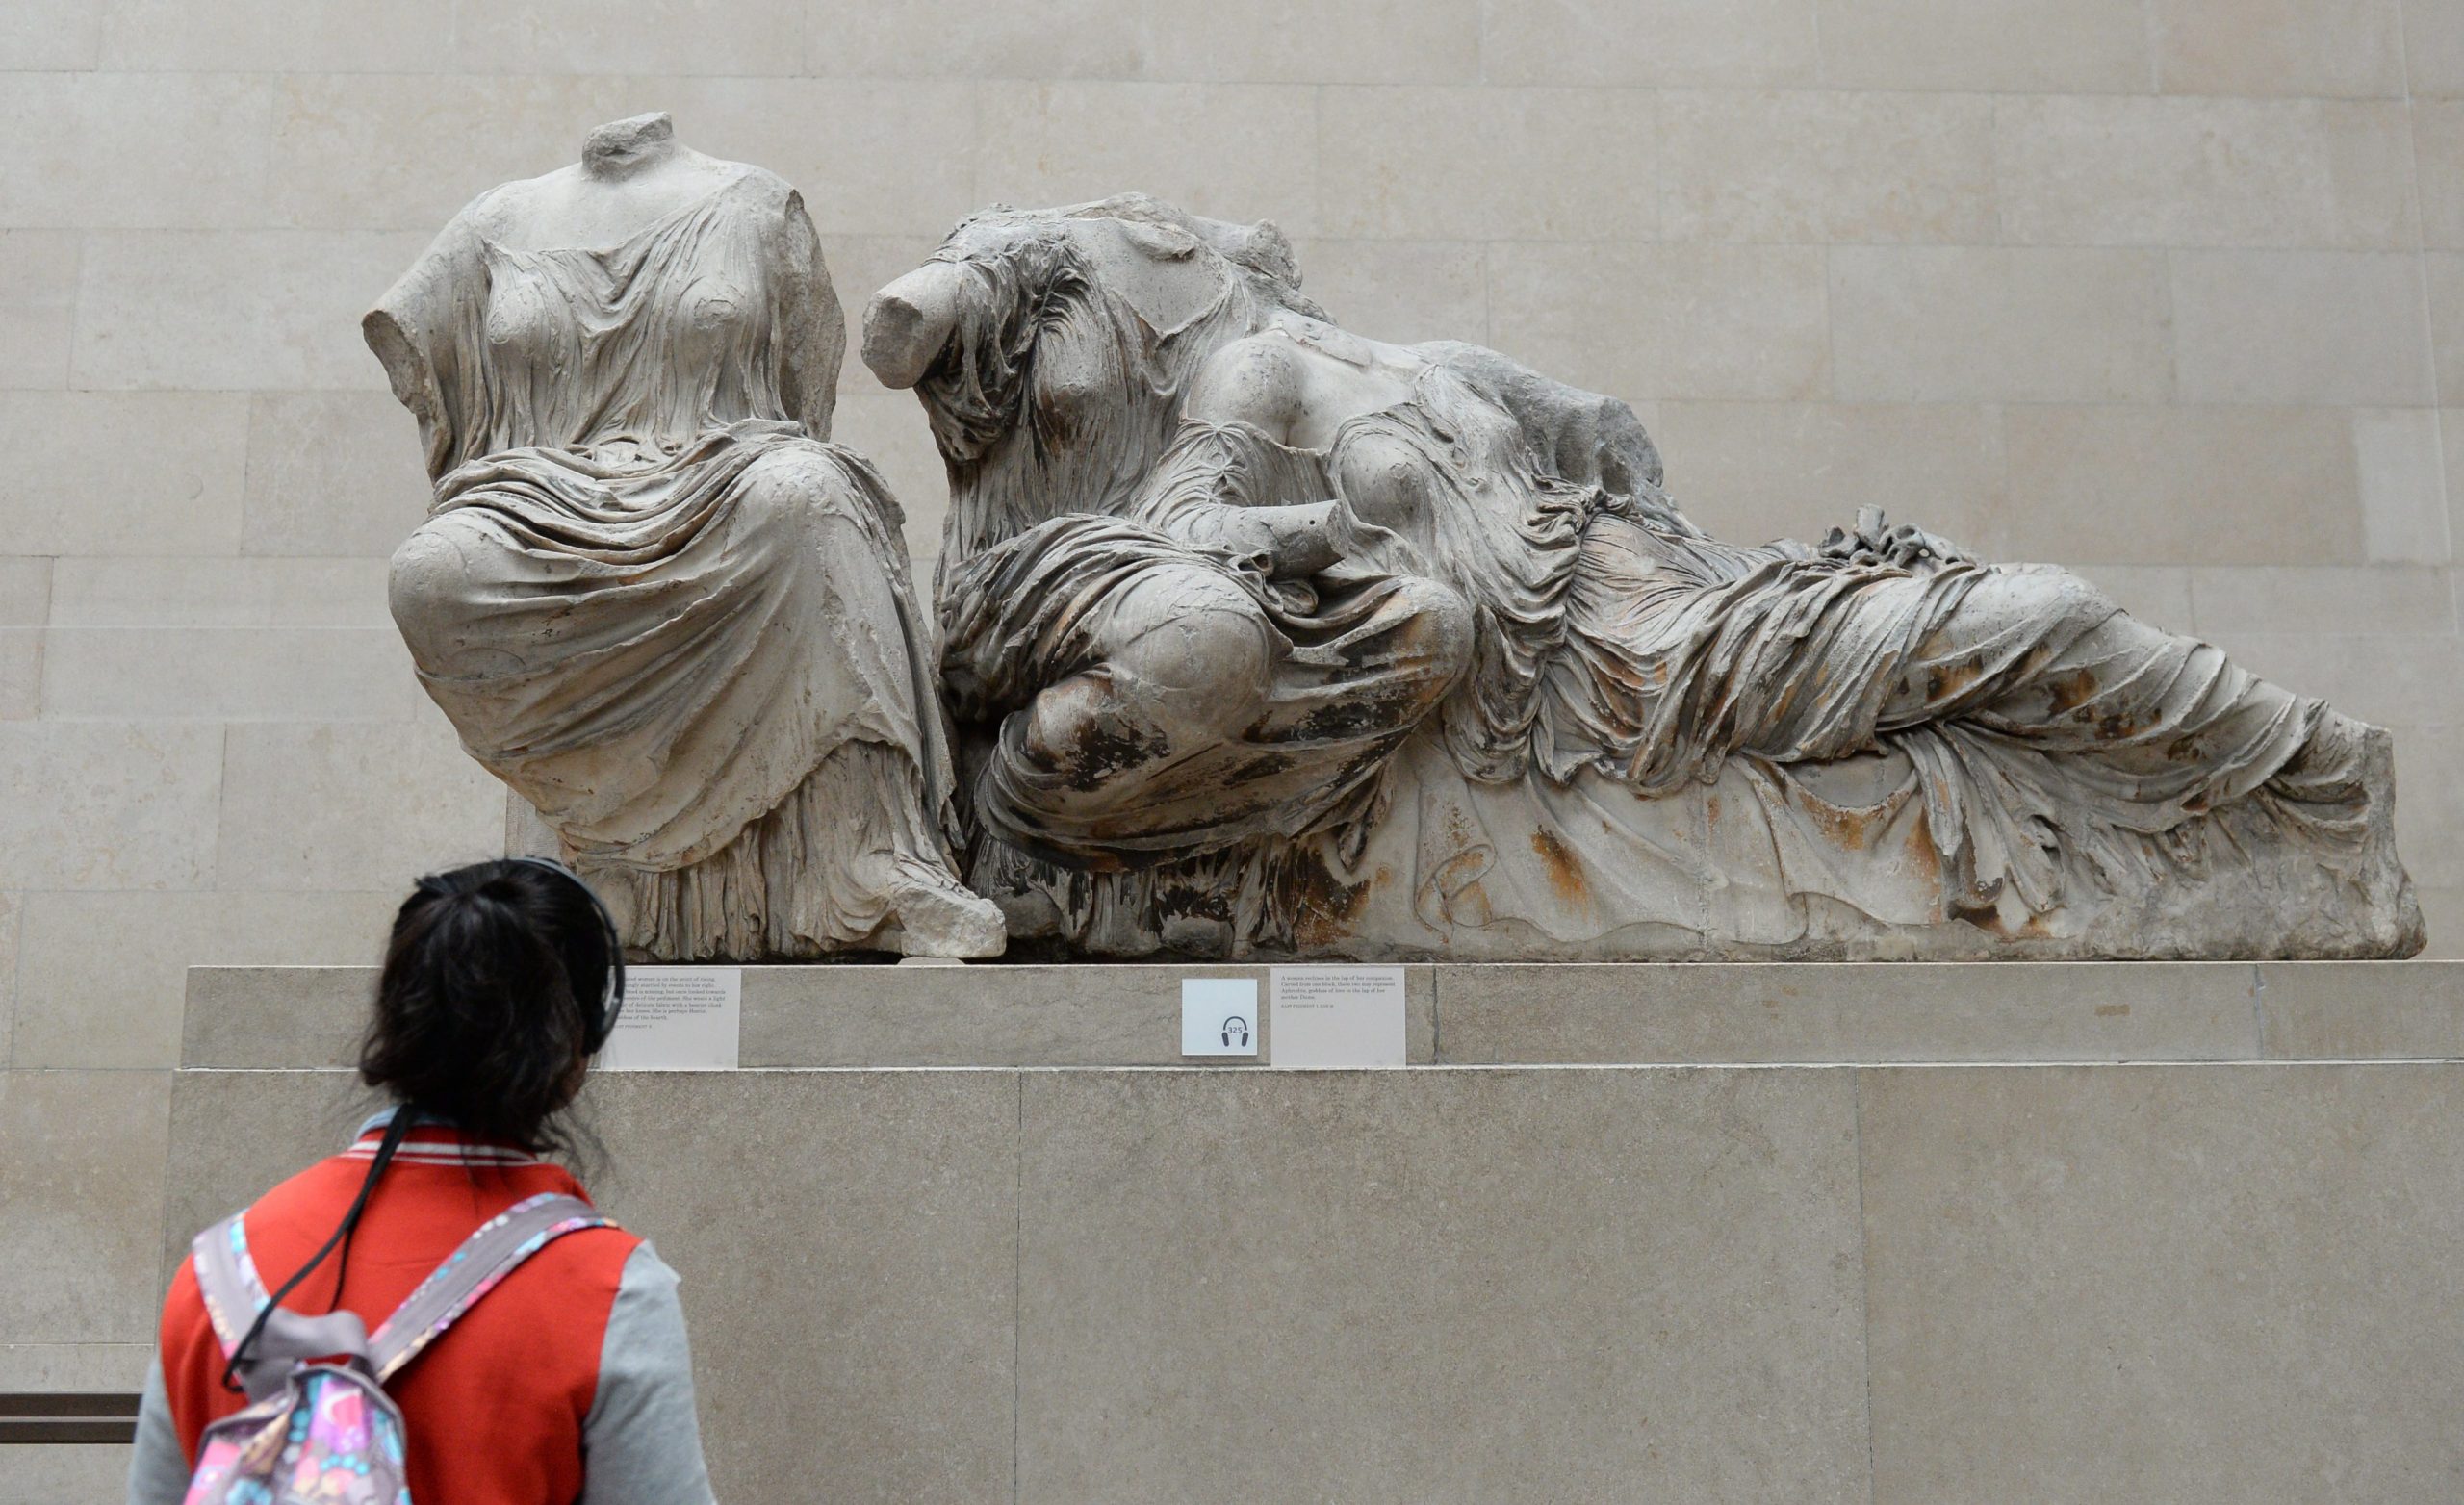 Poll – The British are in favor of the return of the Parthenon Sculptures